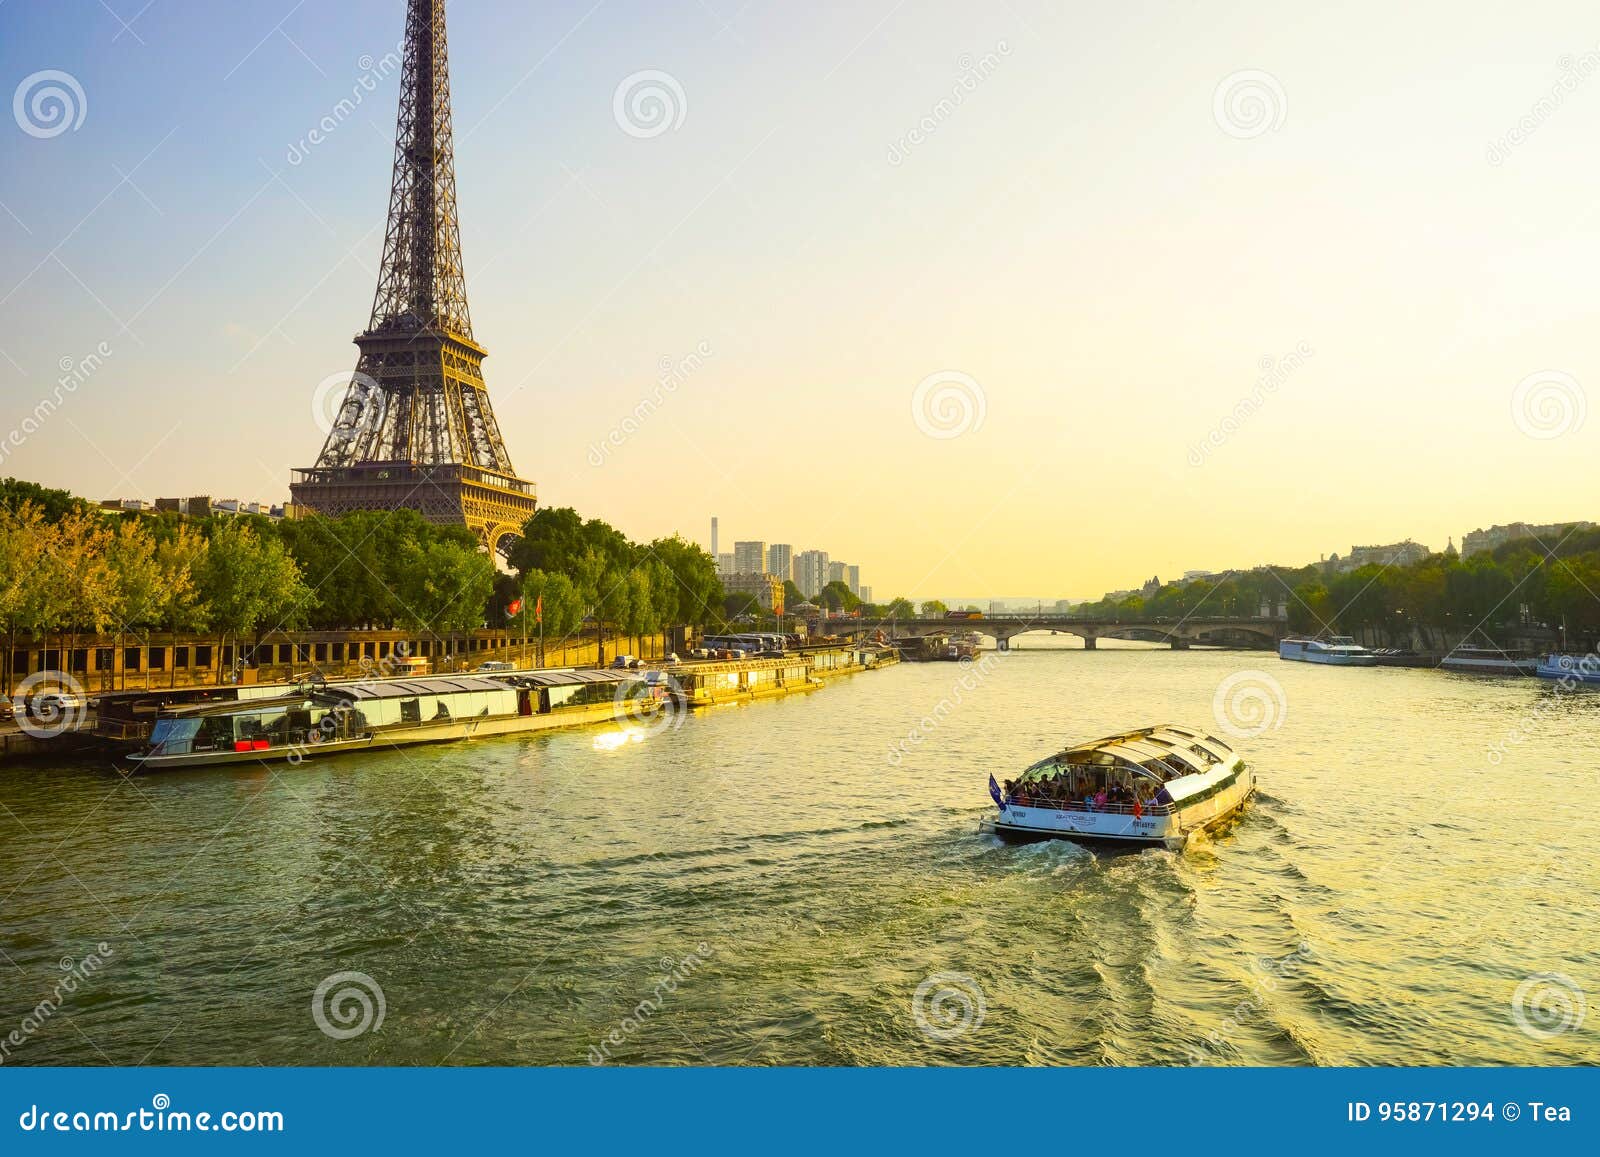 Paris downtown editorial stock image. Image of french - 95871294